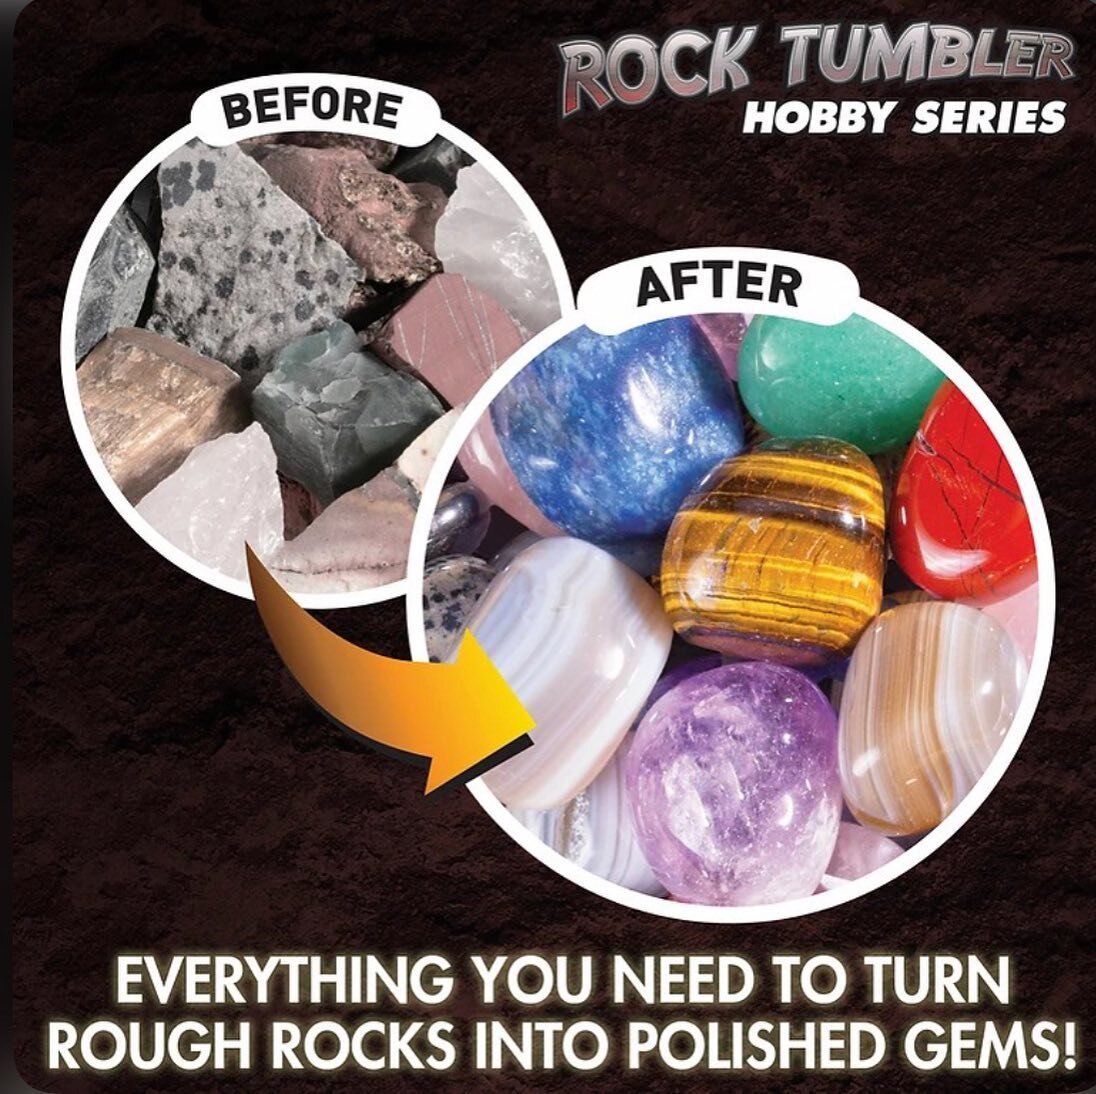 Here&rsquo;s a fun idea for the weekend! This rock tumbler kit has everything you need to create gemstones! Includes the tumbler and barrel, half pound of gemstones (9 different types), polishing grit (4 grades), jewelry fastenings, learning guide, a